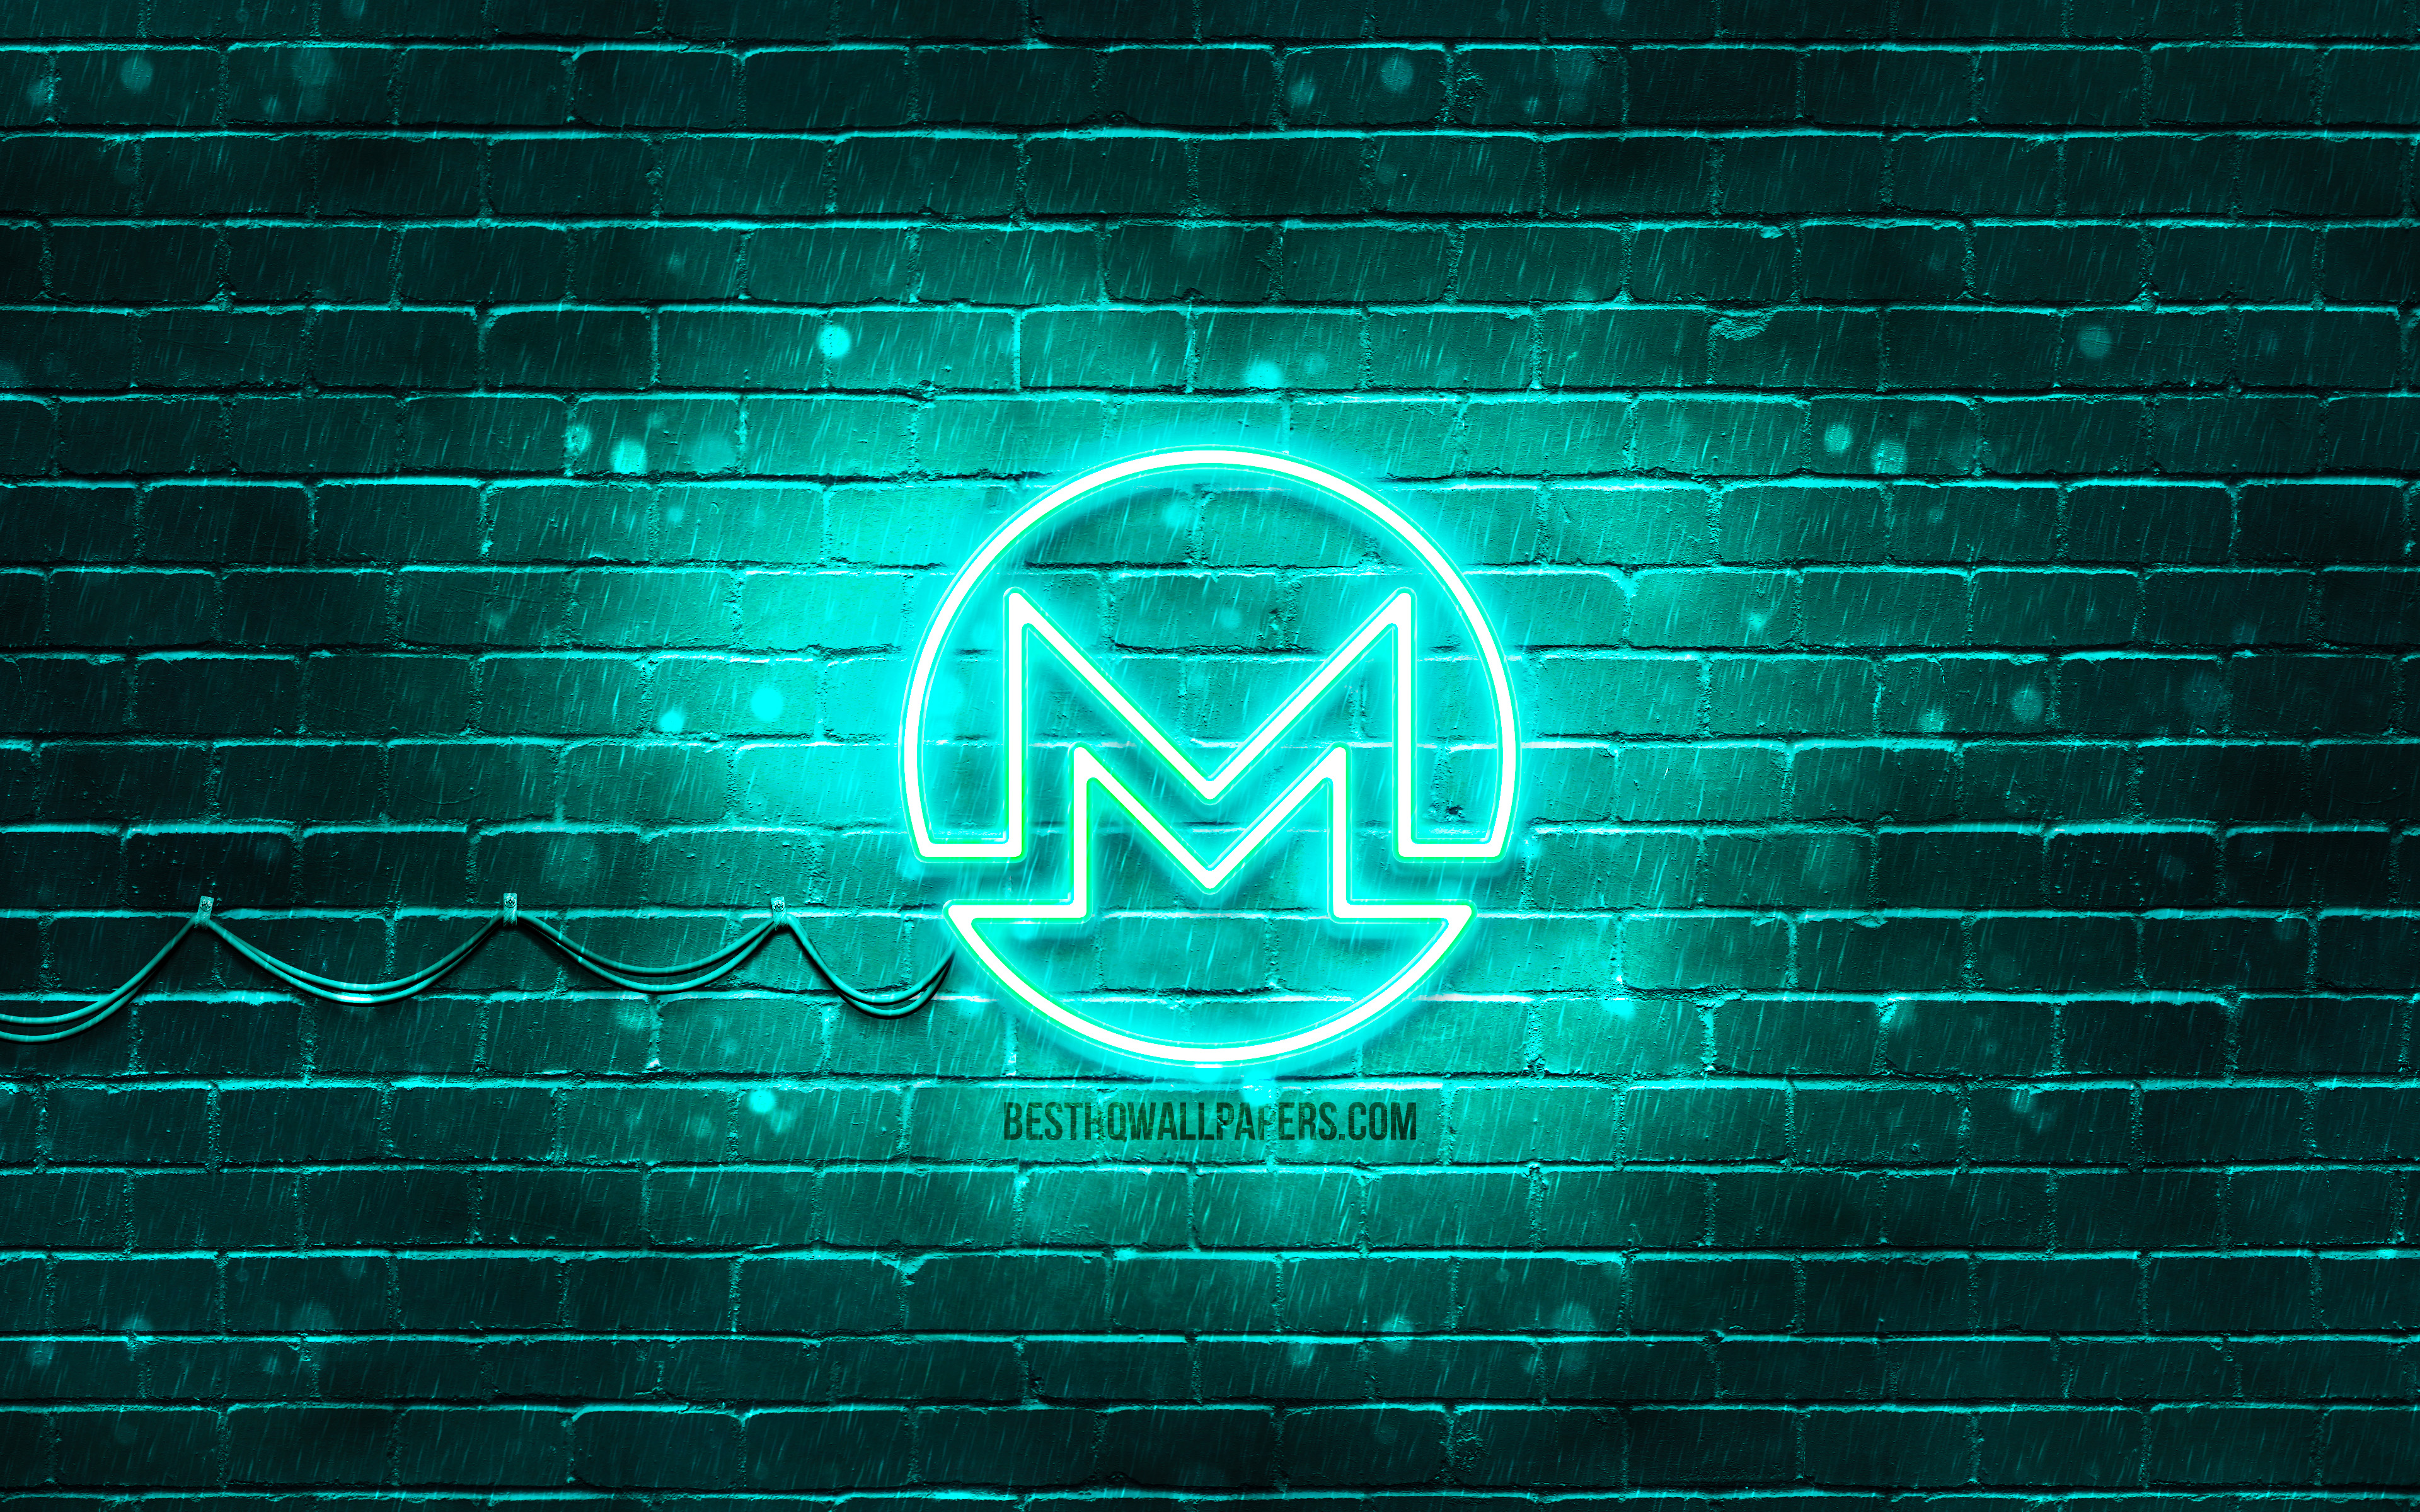 Download wallpaper Monero turquoise logo, 4k, turquoise brickwall, Monero logo, cryptocurrency, Peercoin neon logo, cryptocurrency signs, Monero for desktop with resolution 3840x2400. High Quality HD picture wallpaper